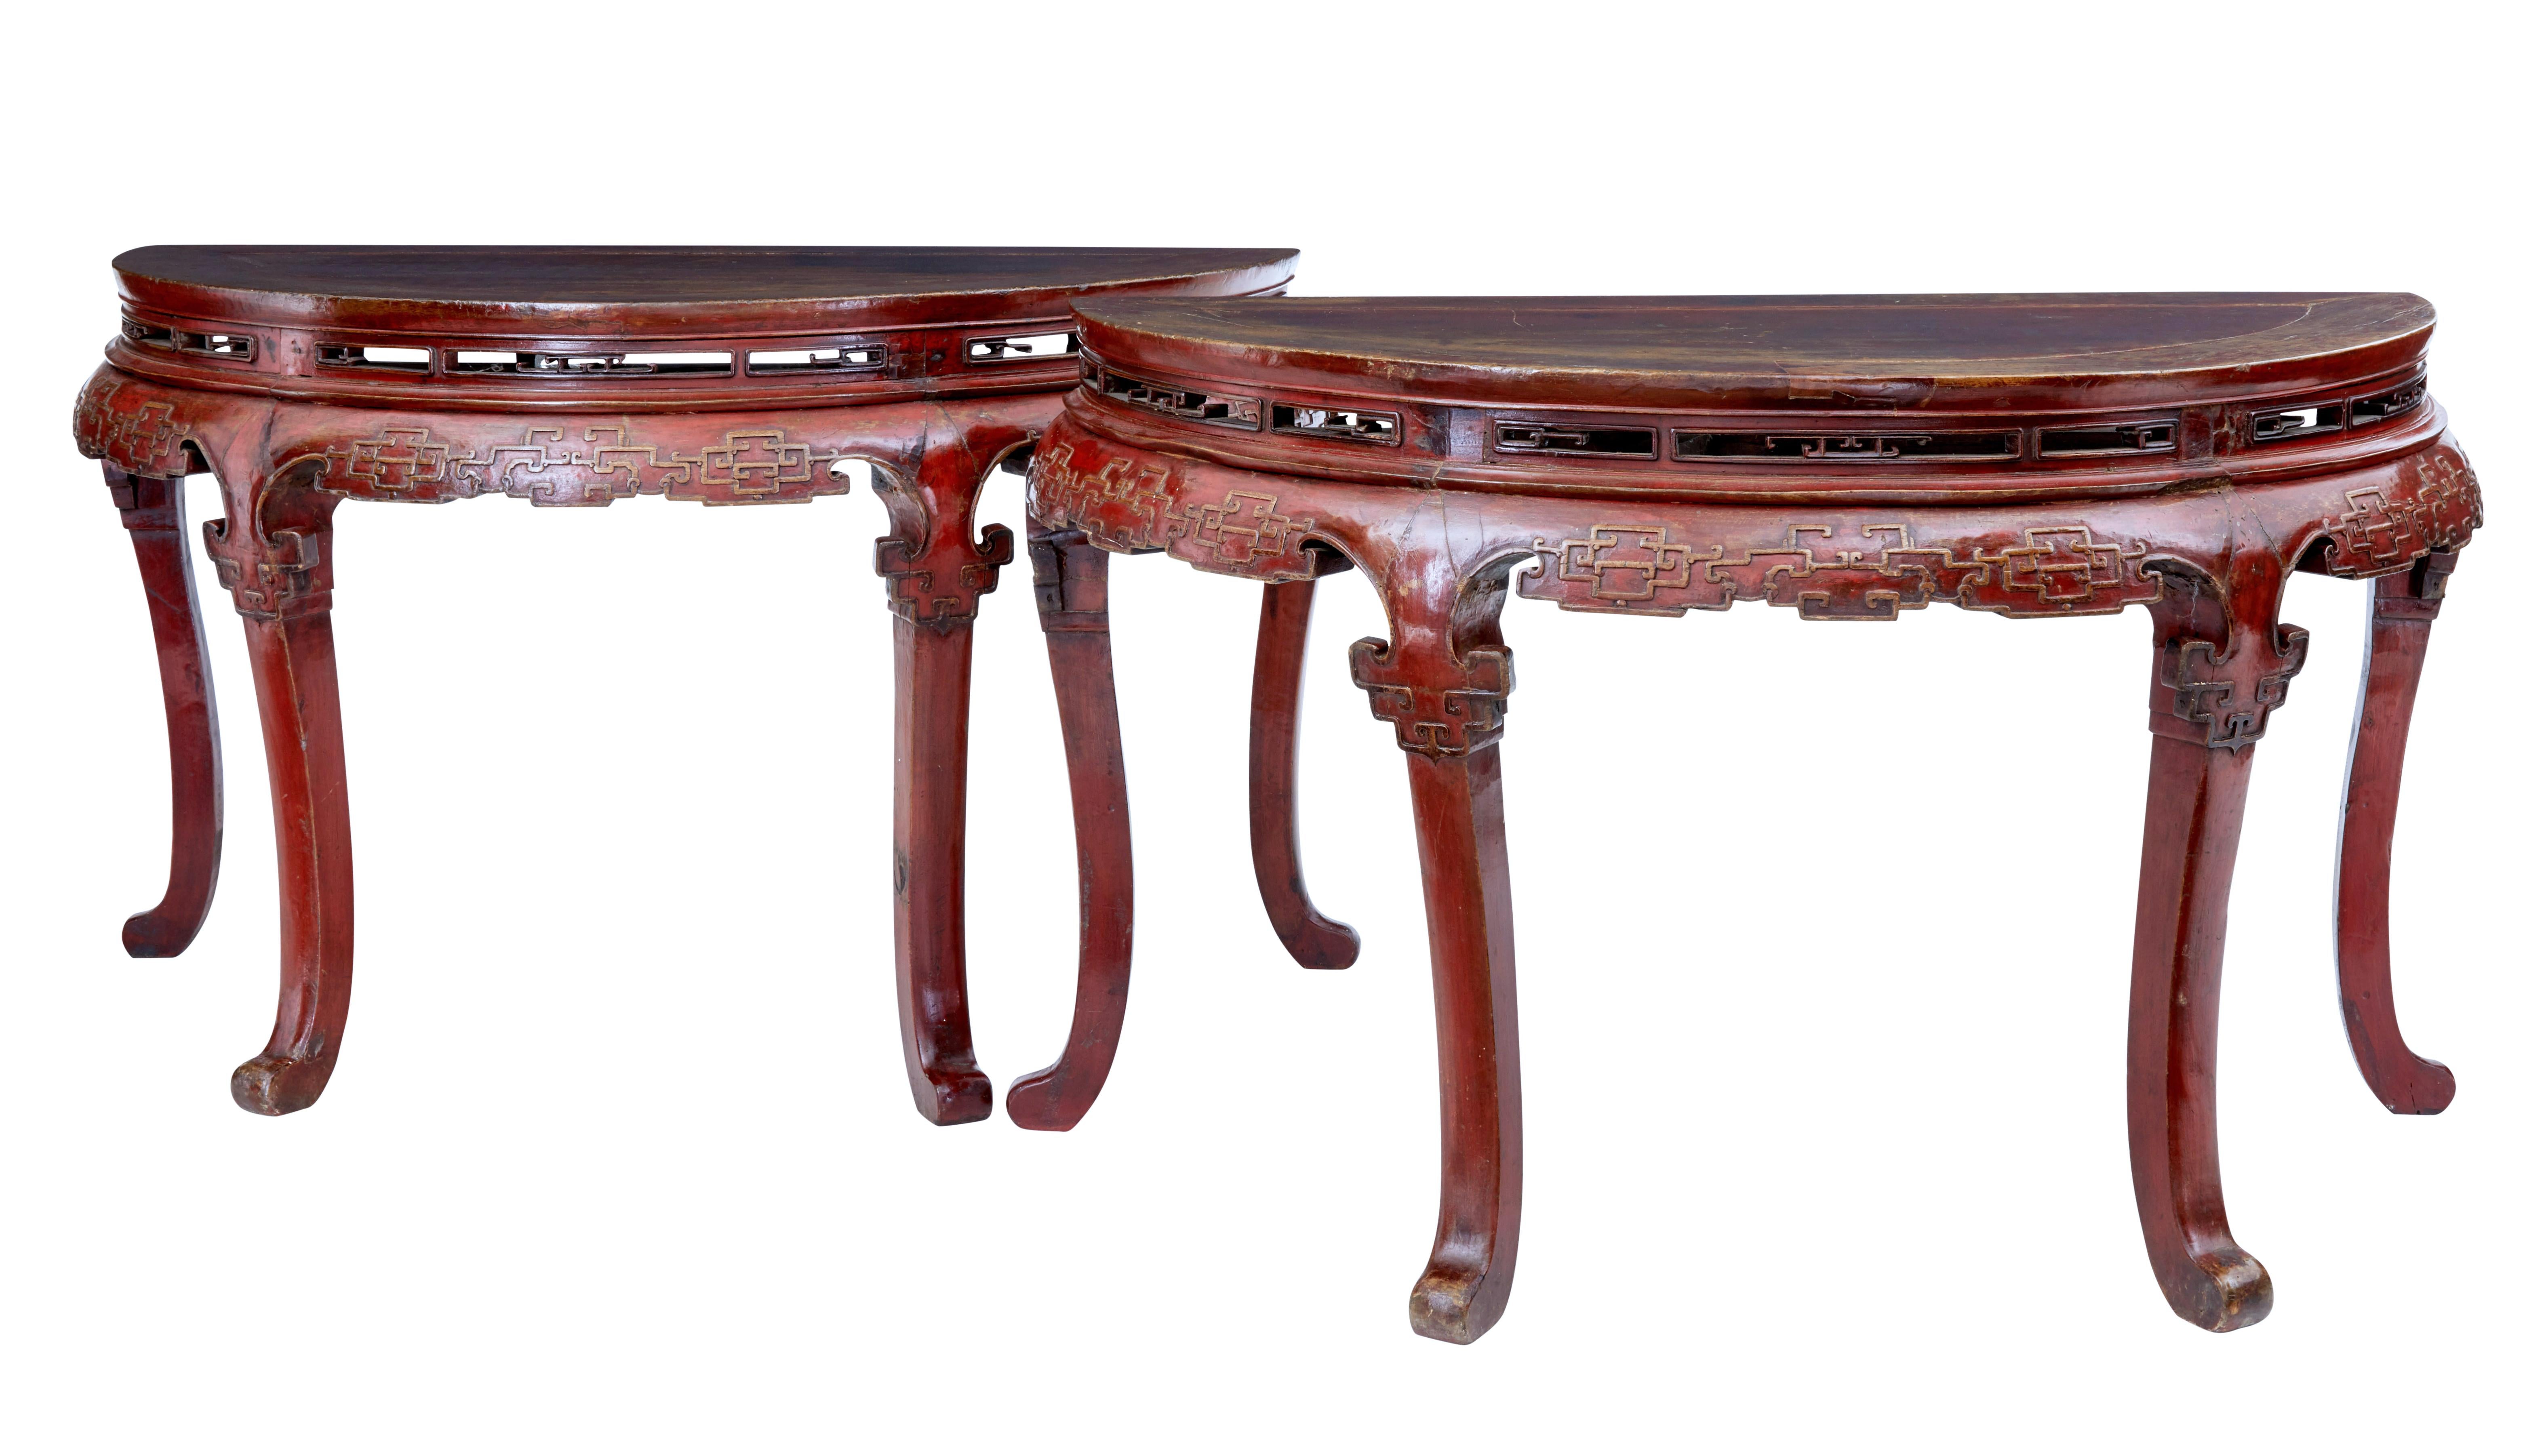 Pair of 19th century red lacquer Chinese demilune tables, circa 1880.

These tables work as a pair of demilune tables and stand back to back, slotting together to form a center table or even a dining table.

Pierced apertures below the tabletop,